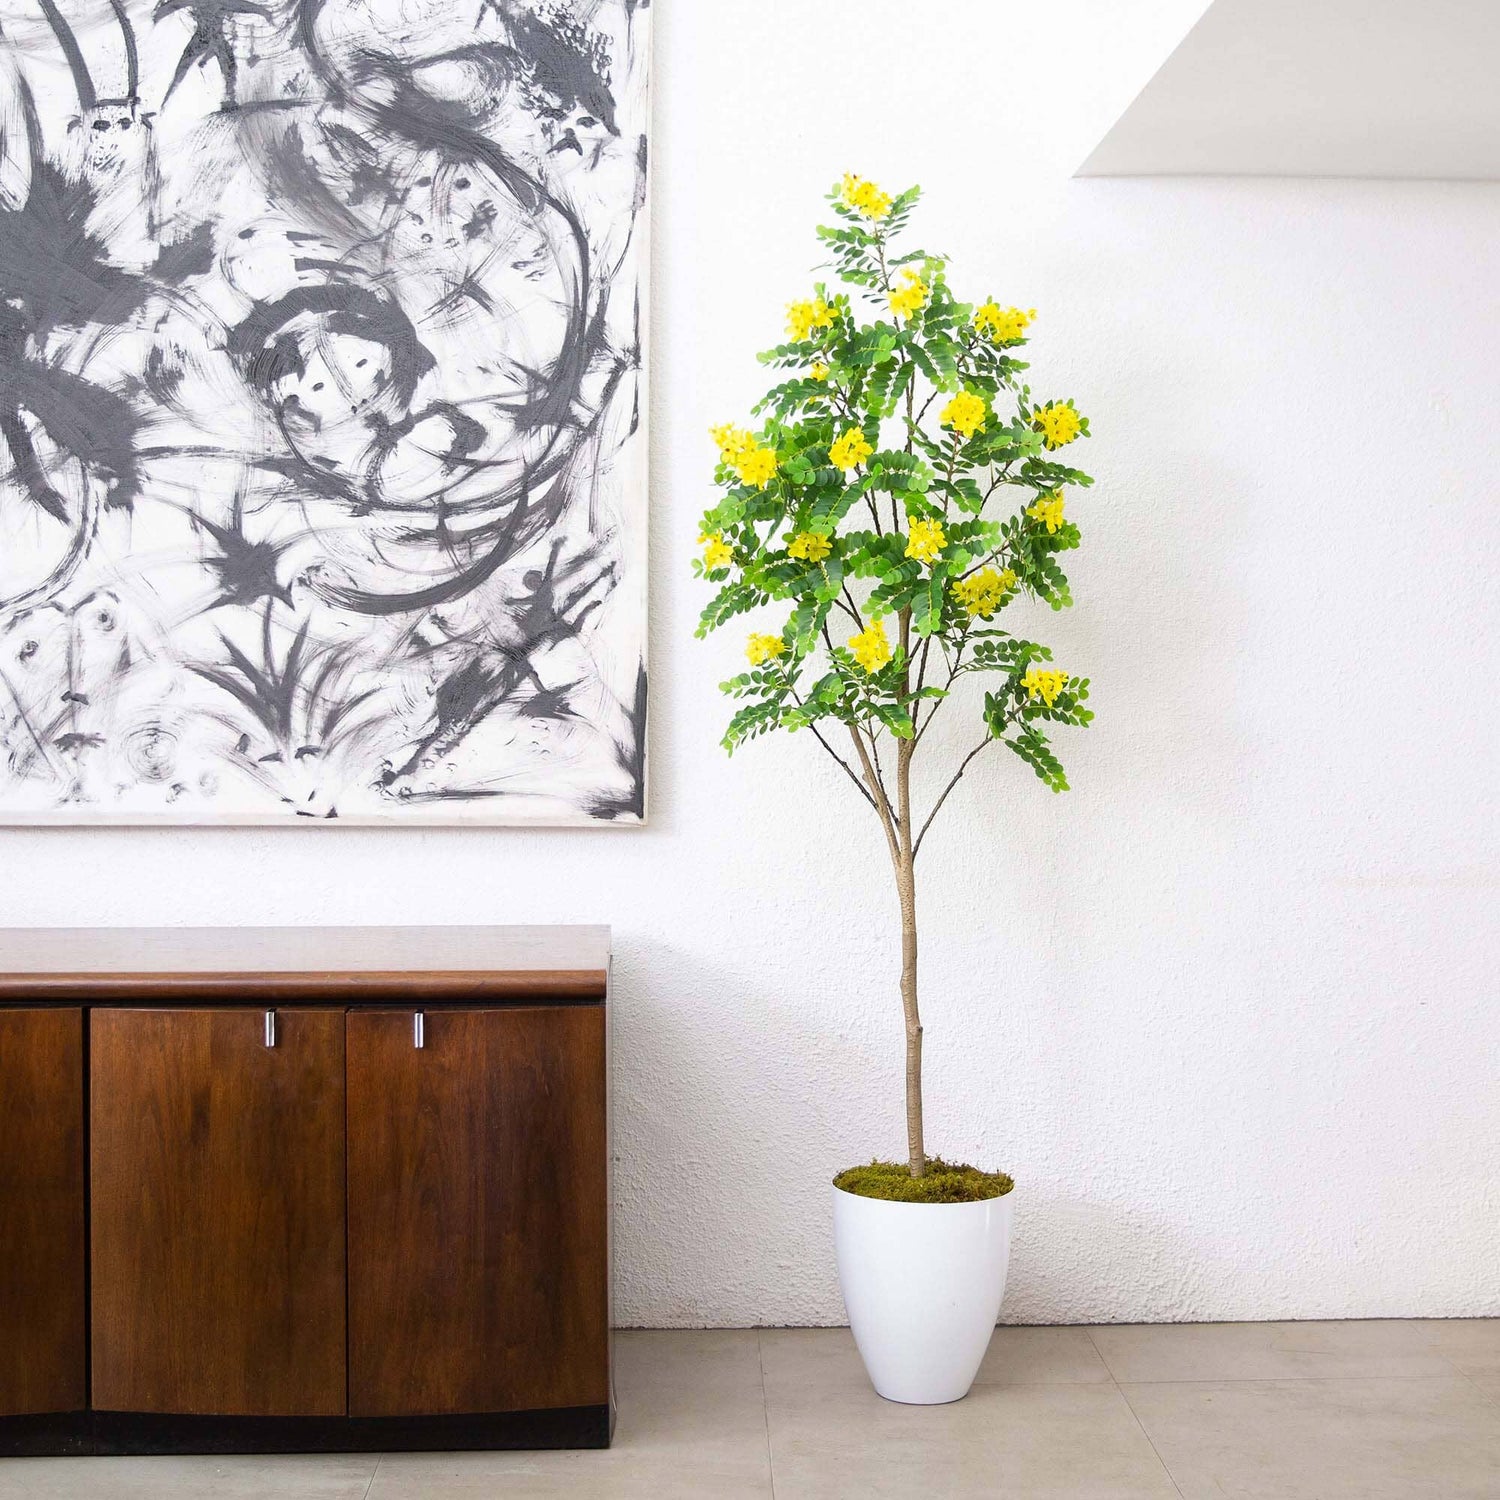 6’ Artificial Flowering Citrus Tree with Real Touch Leaves